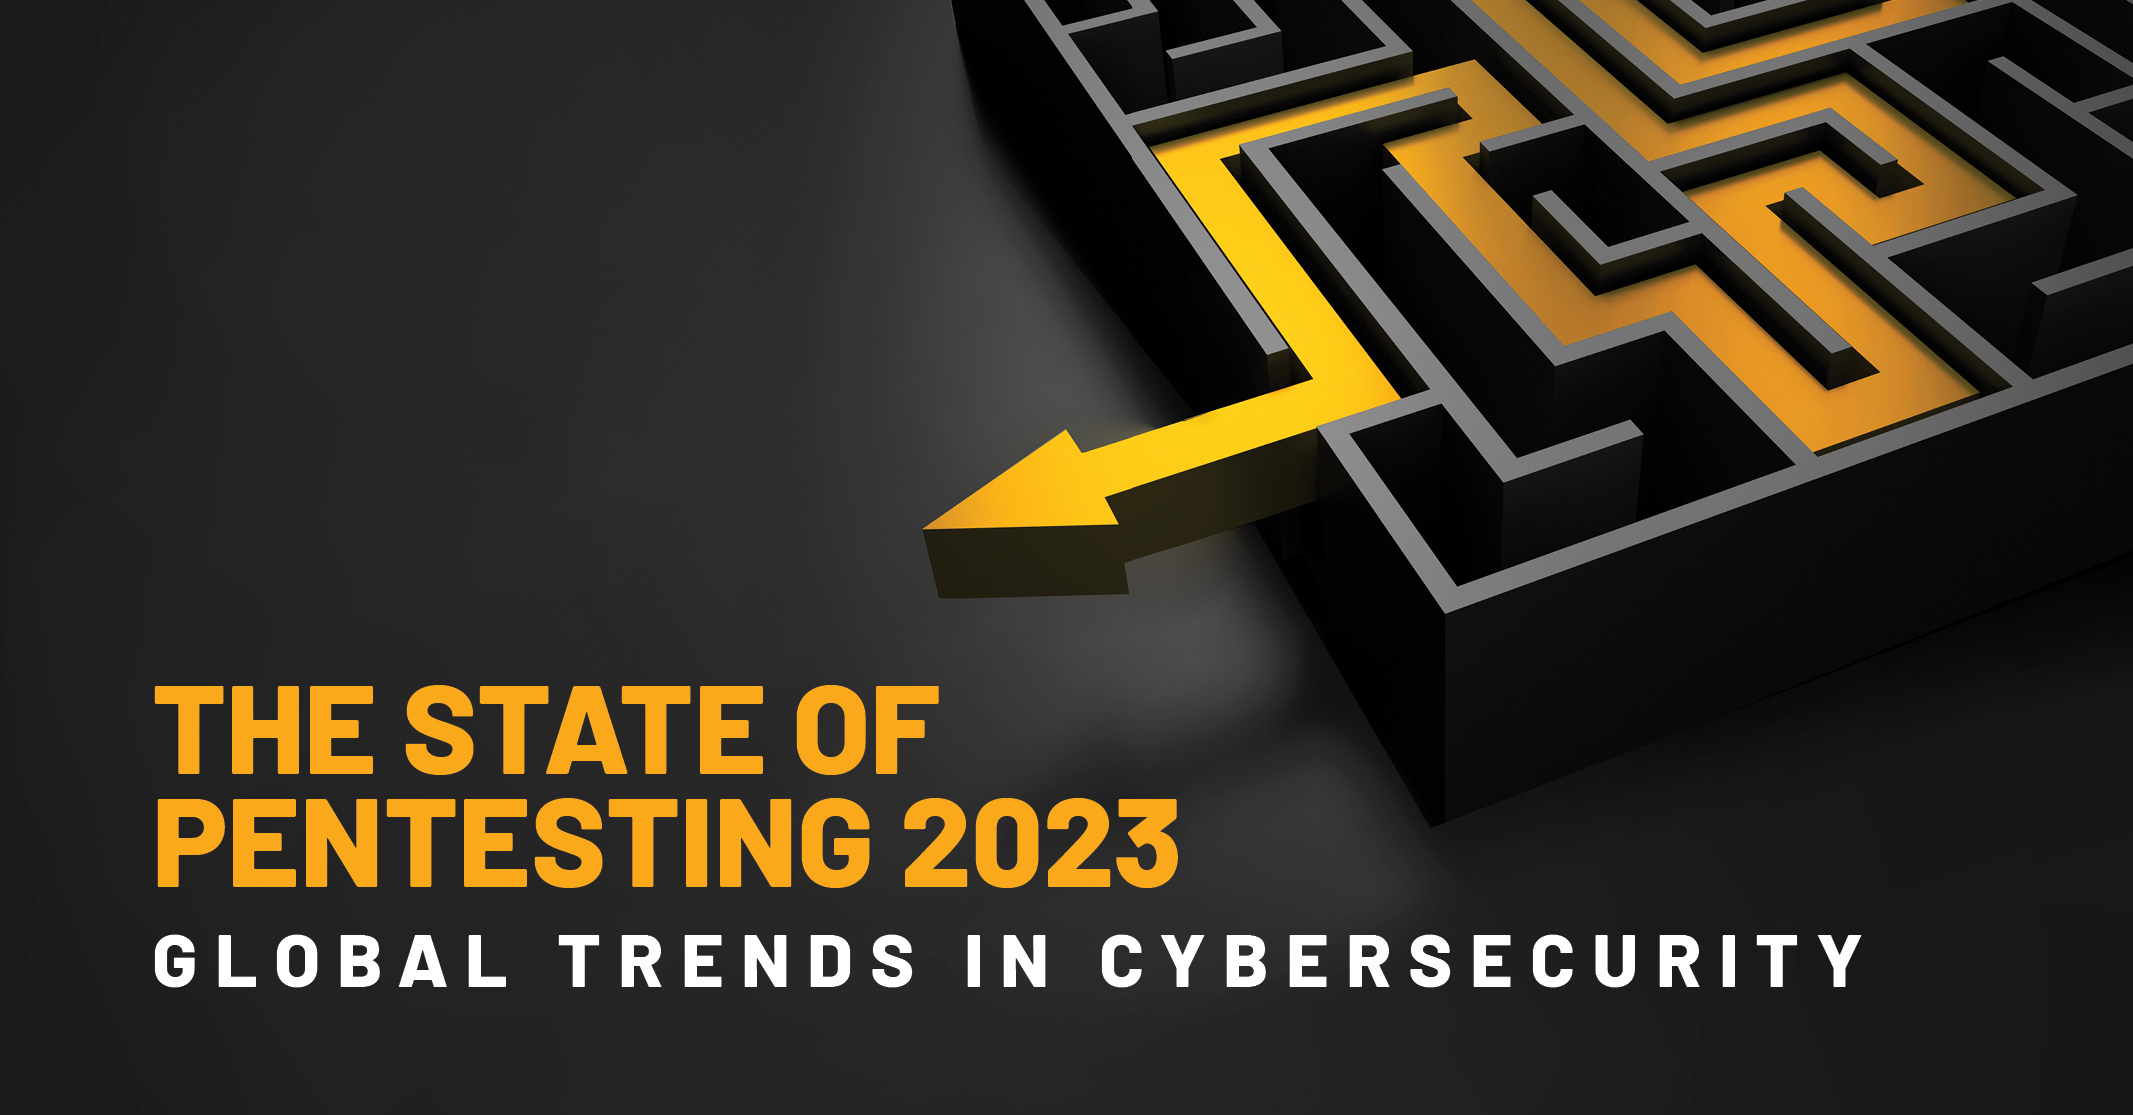 The State of Pentesting 2023: Global trends in cybersecurity